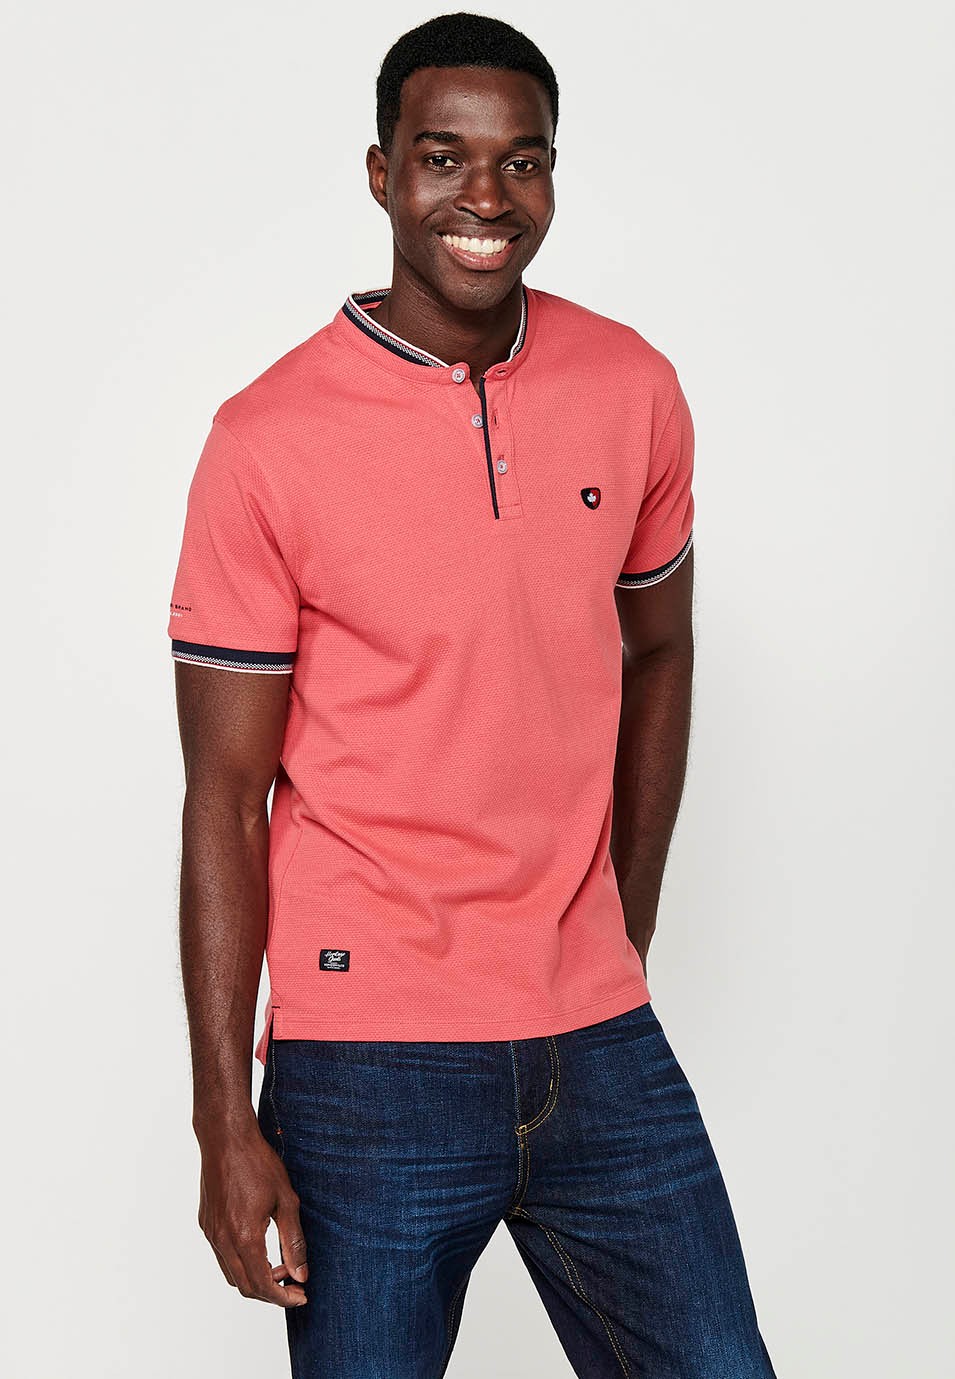 Short-sleeved cotton polo shirt with ribbed finish with round neck with buttoned opening and textured with side slits in Pink for Men